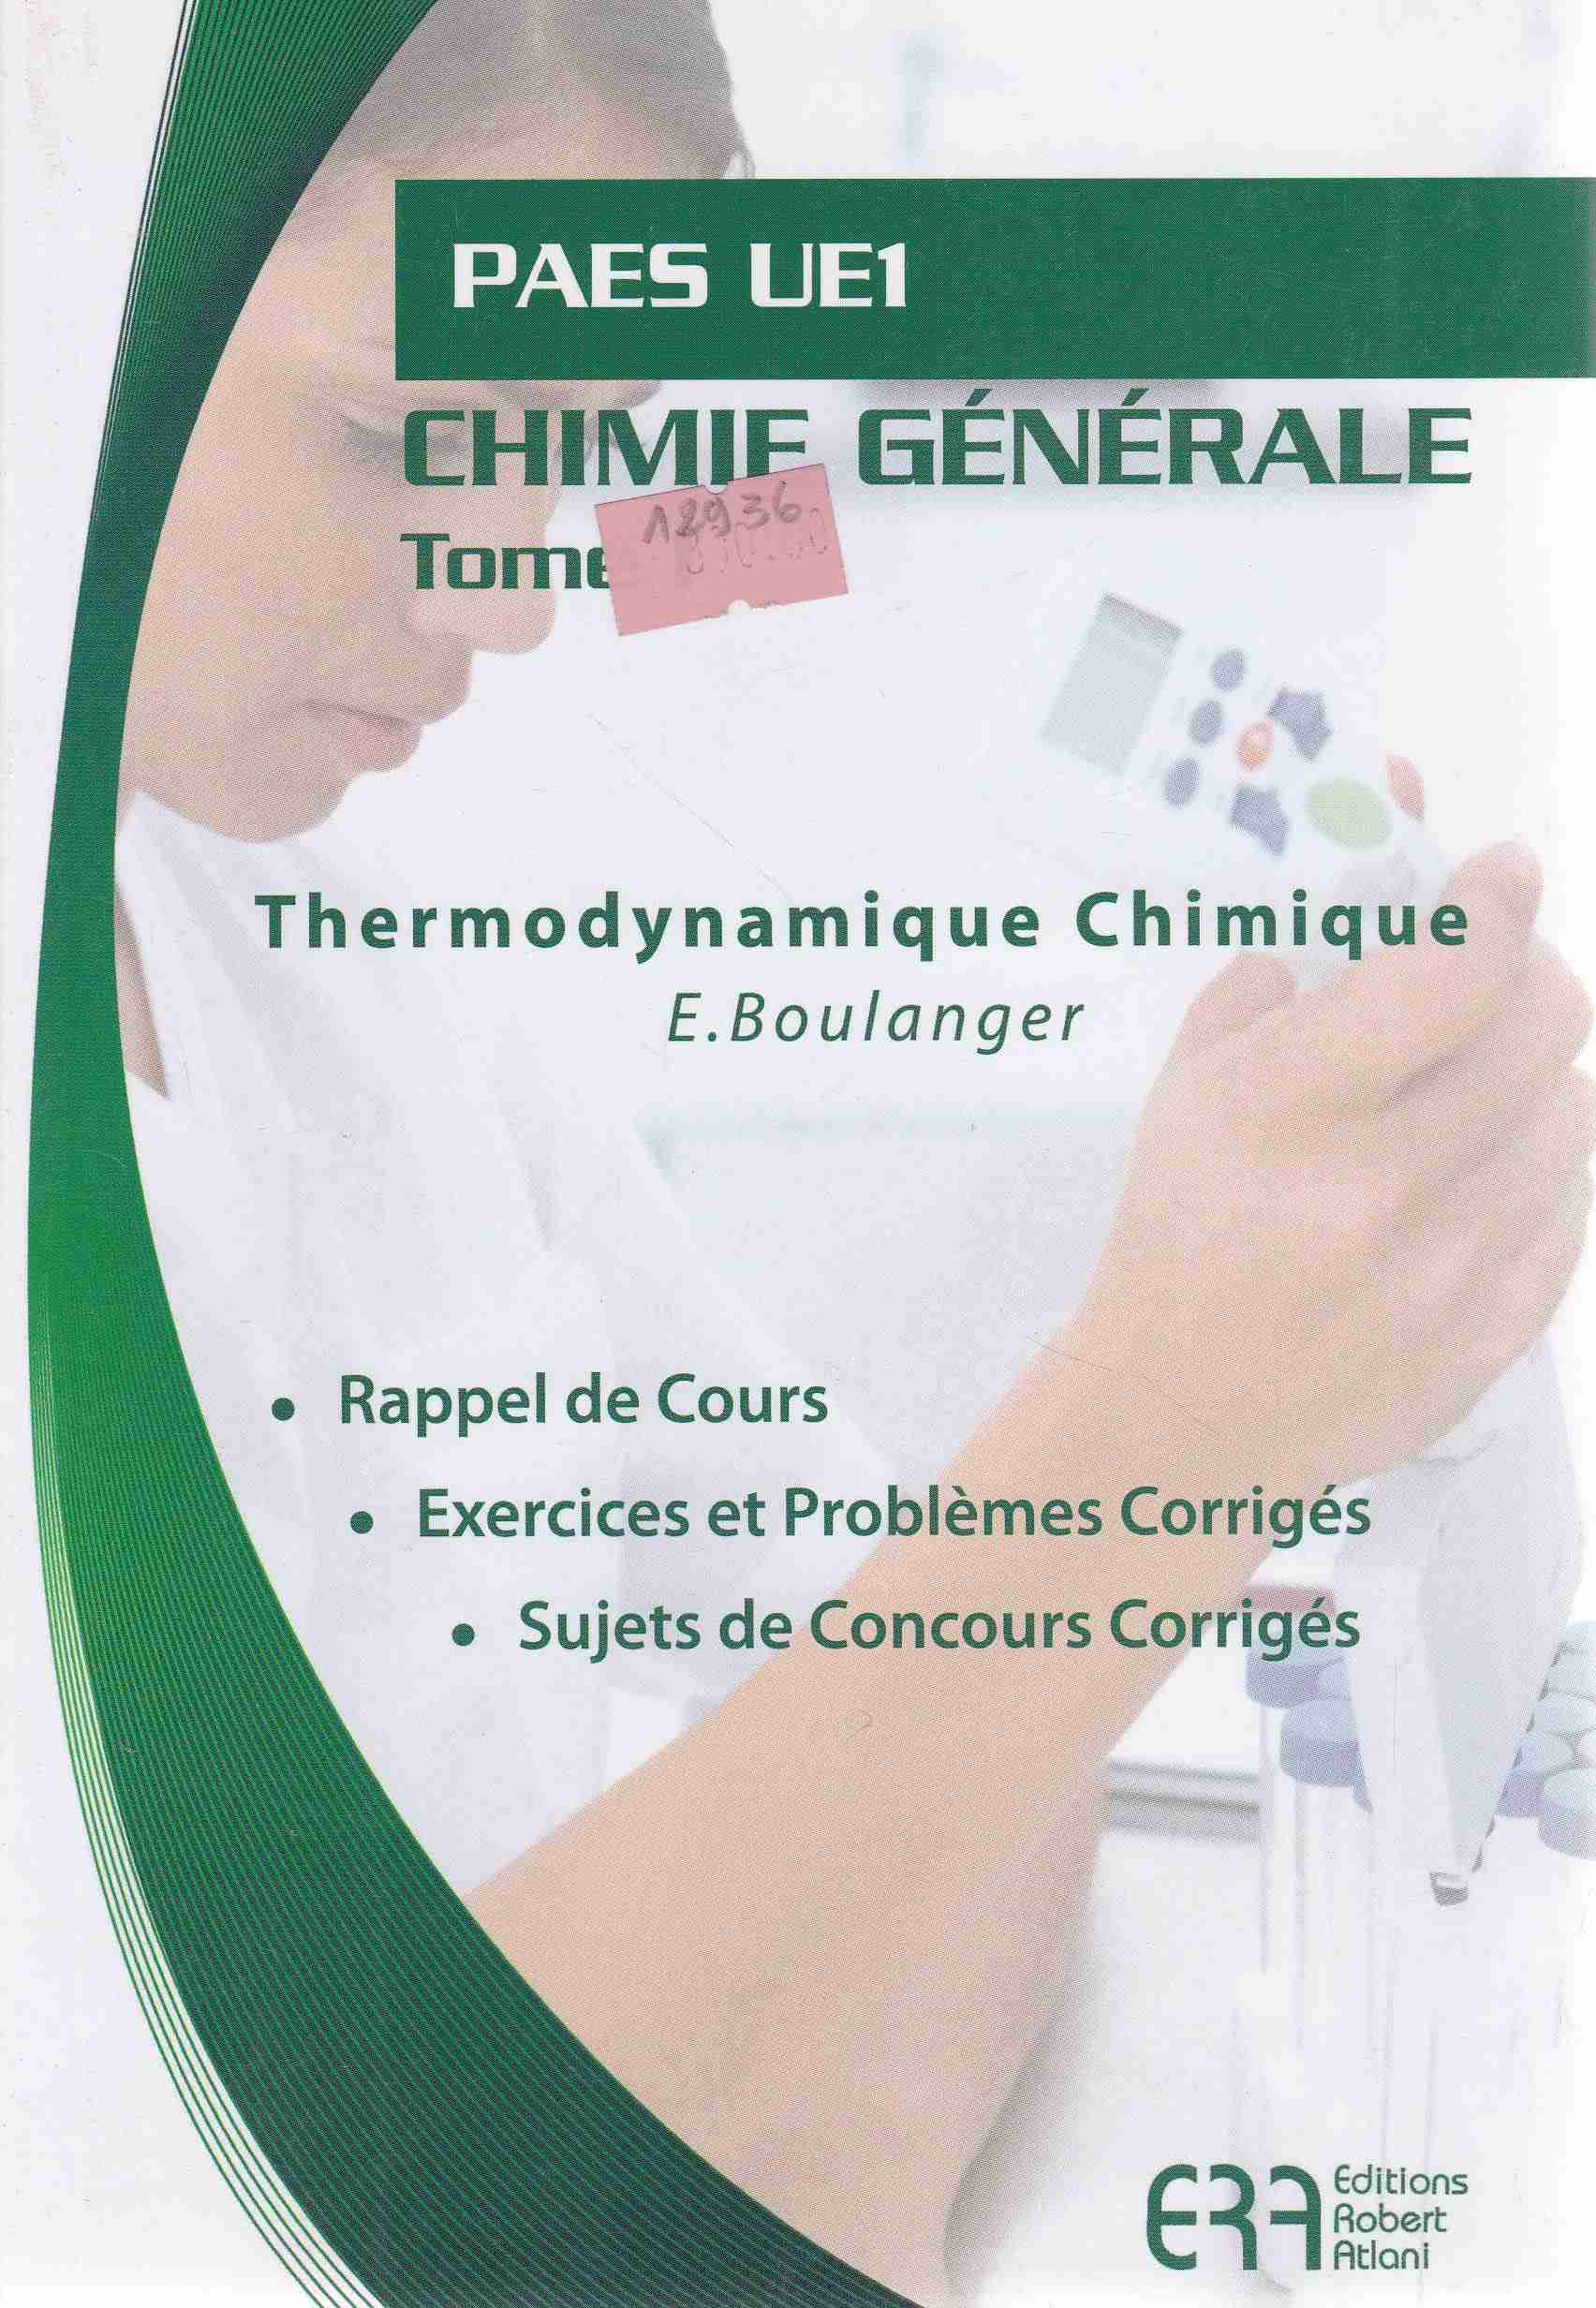 paes ue1 chimie generale tome 1